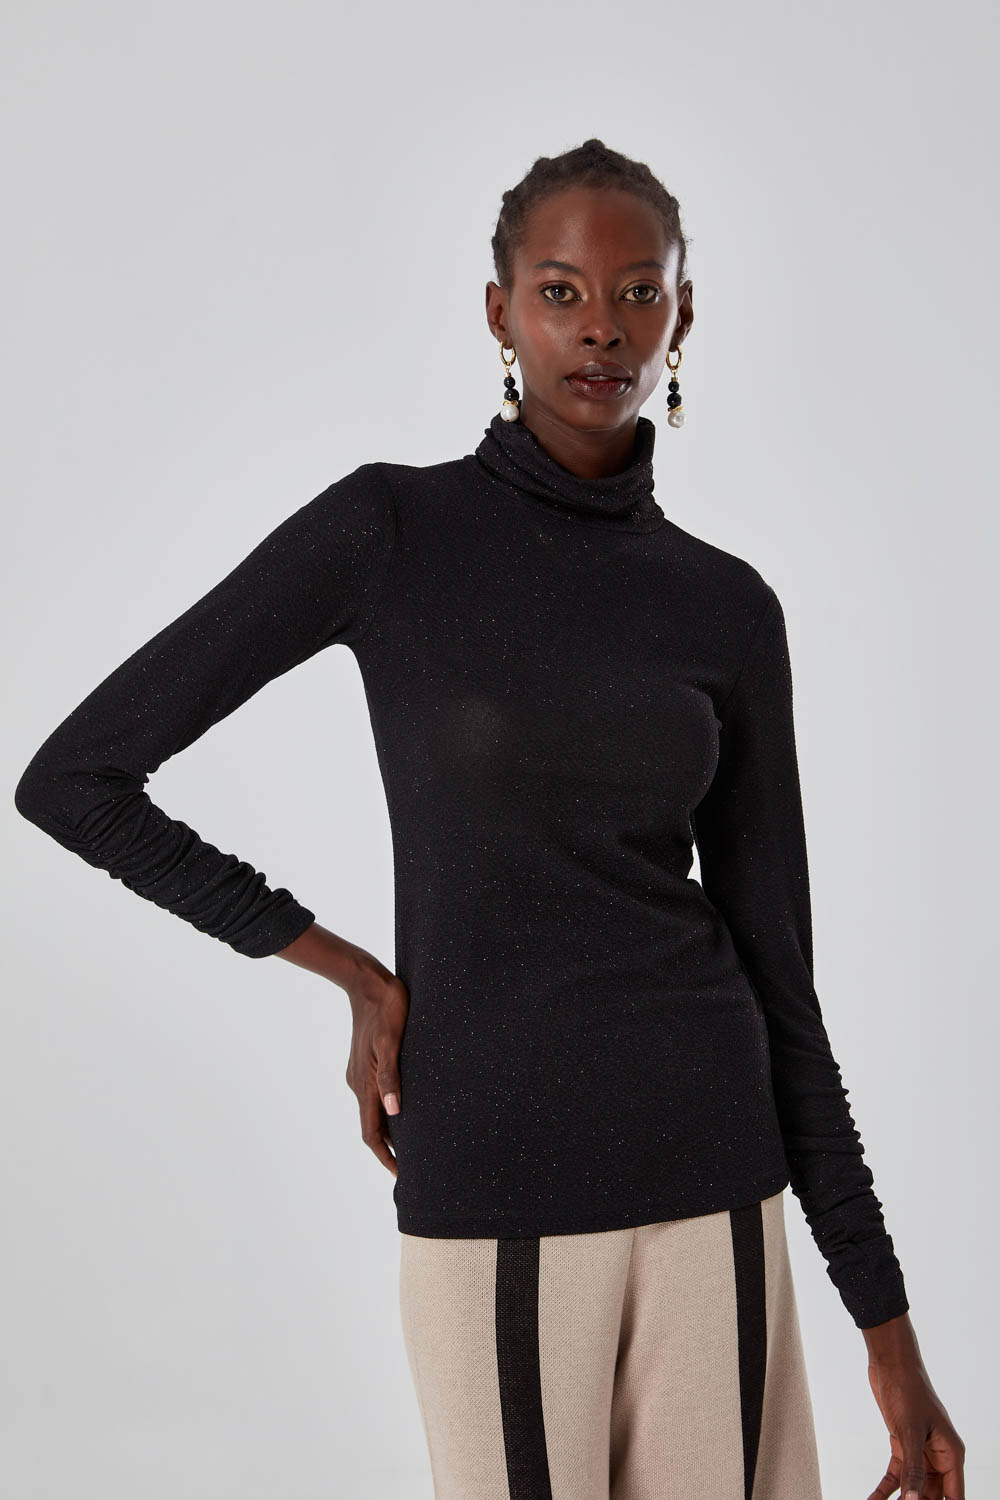 Turtle Neck Knitted Black Body